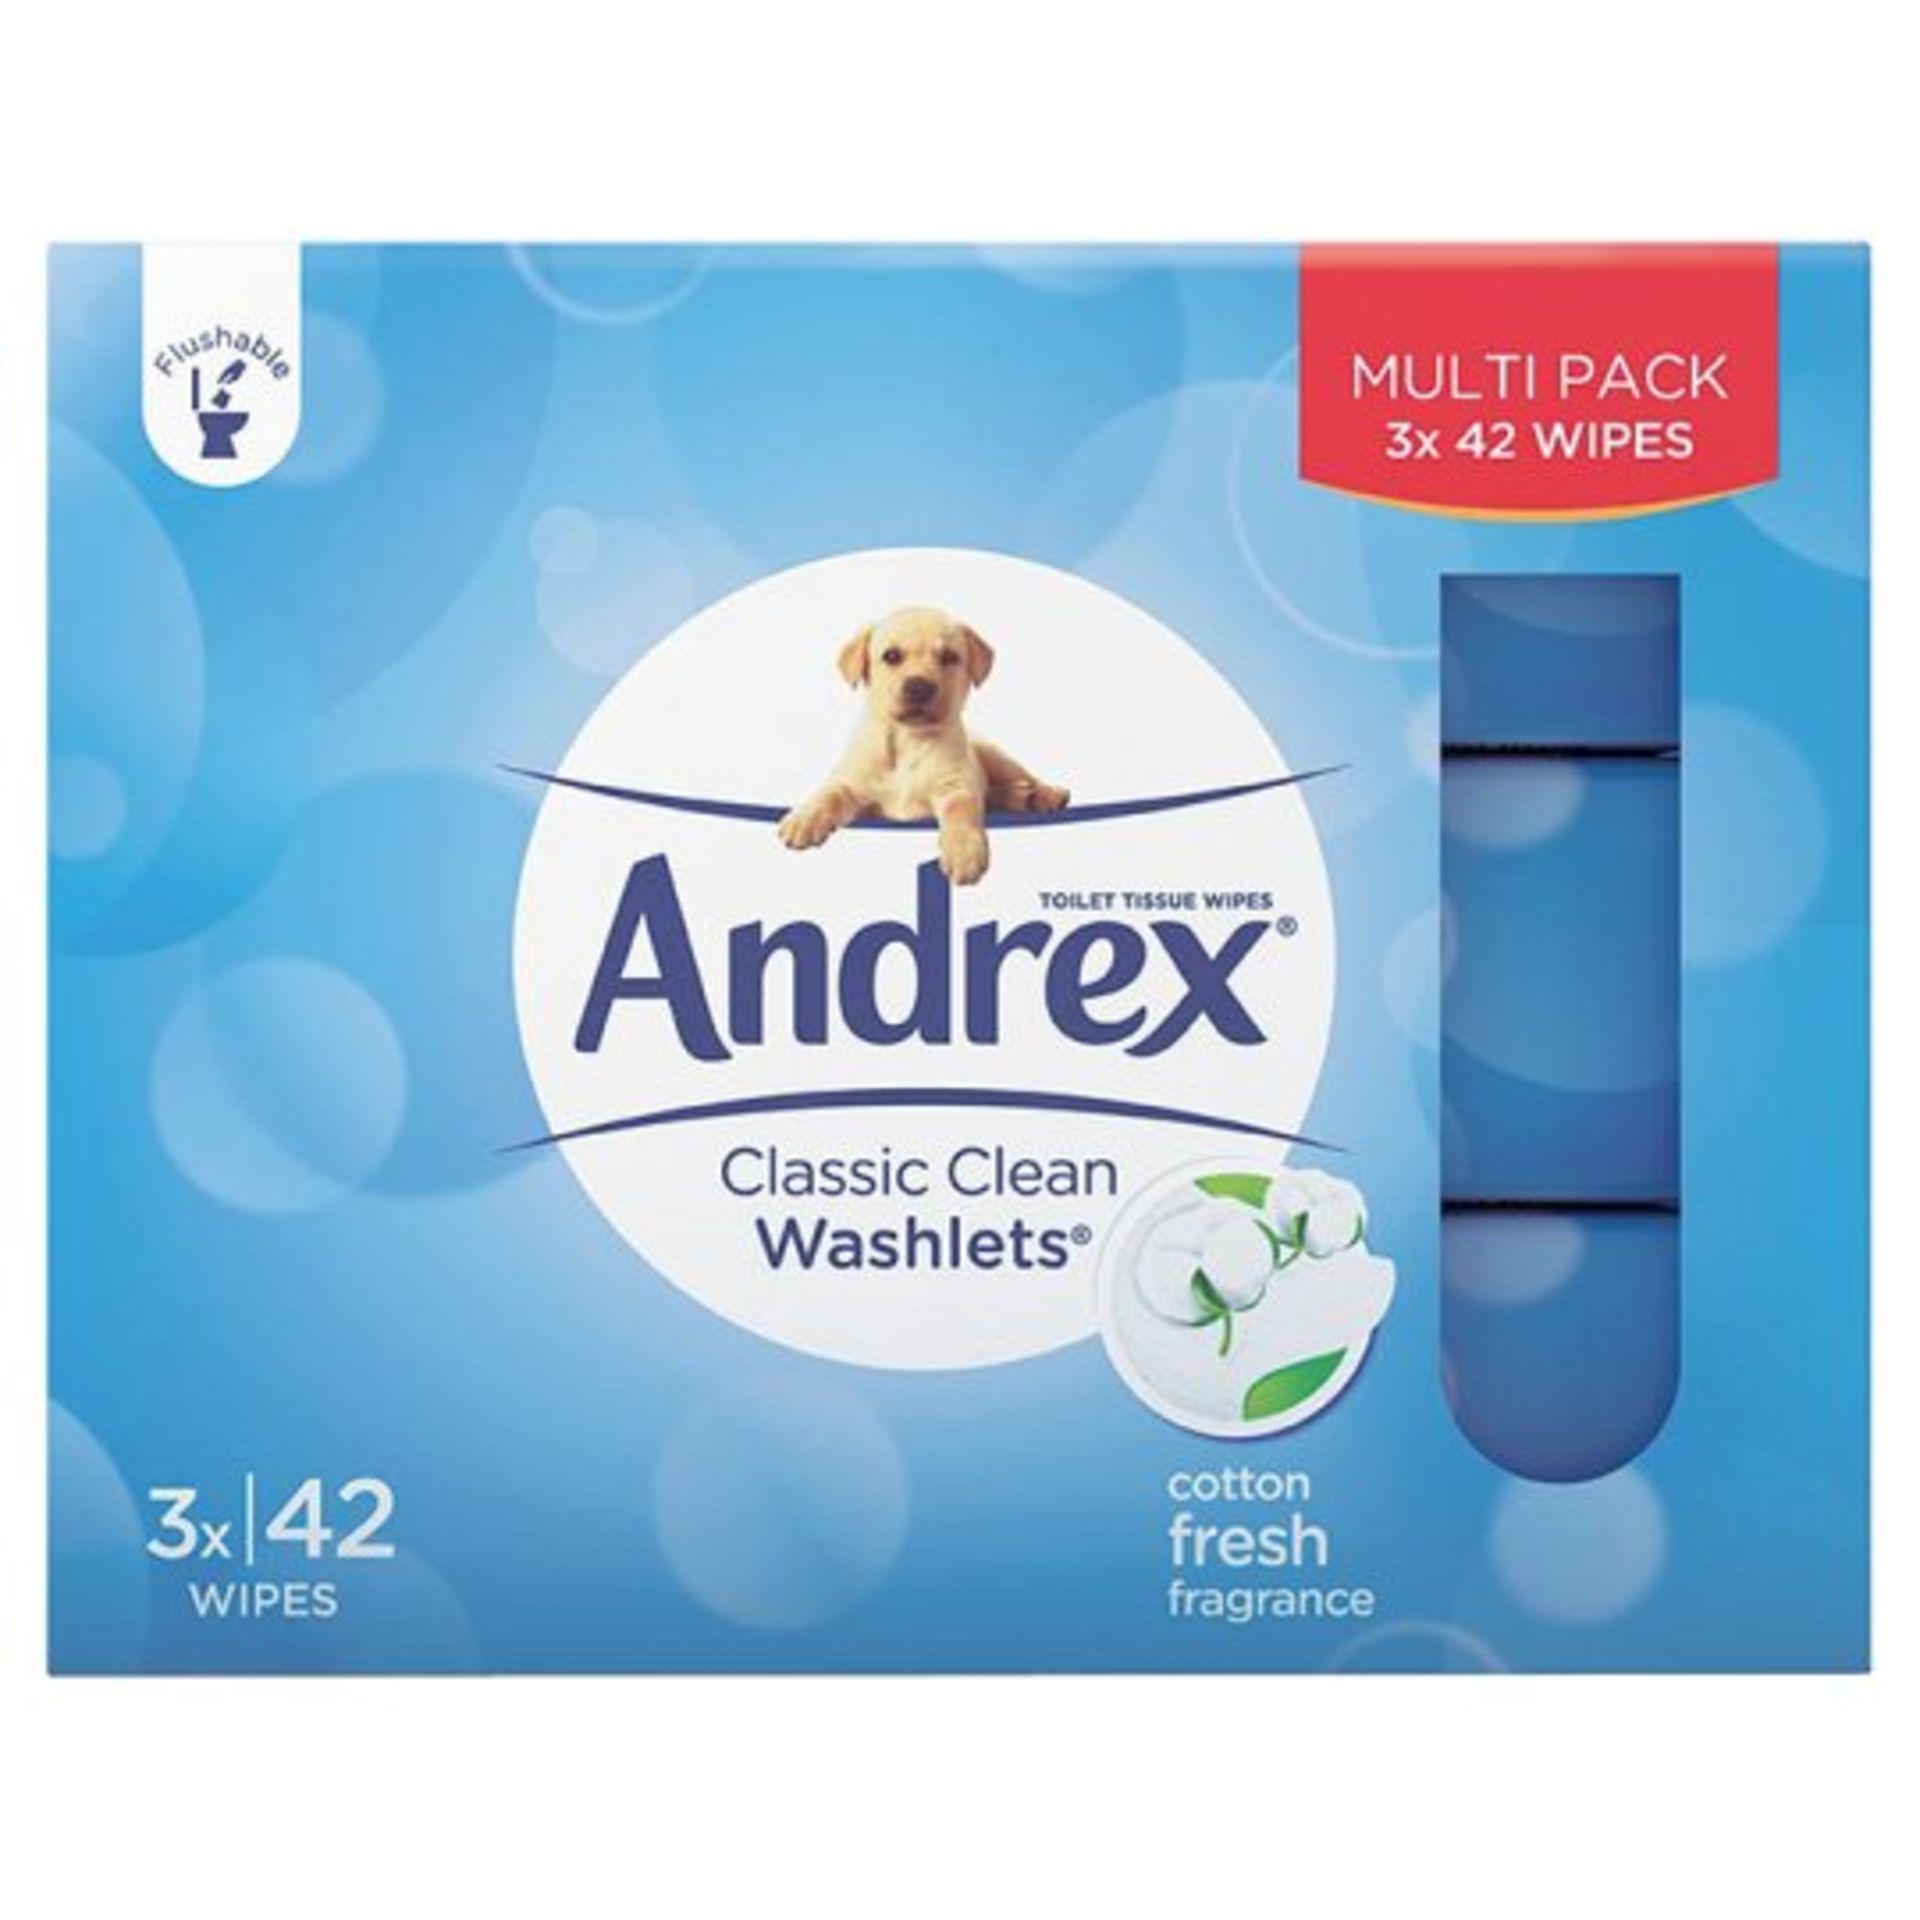 V Brand New Andrex Classic Clean Washlets 3 Pack